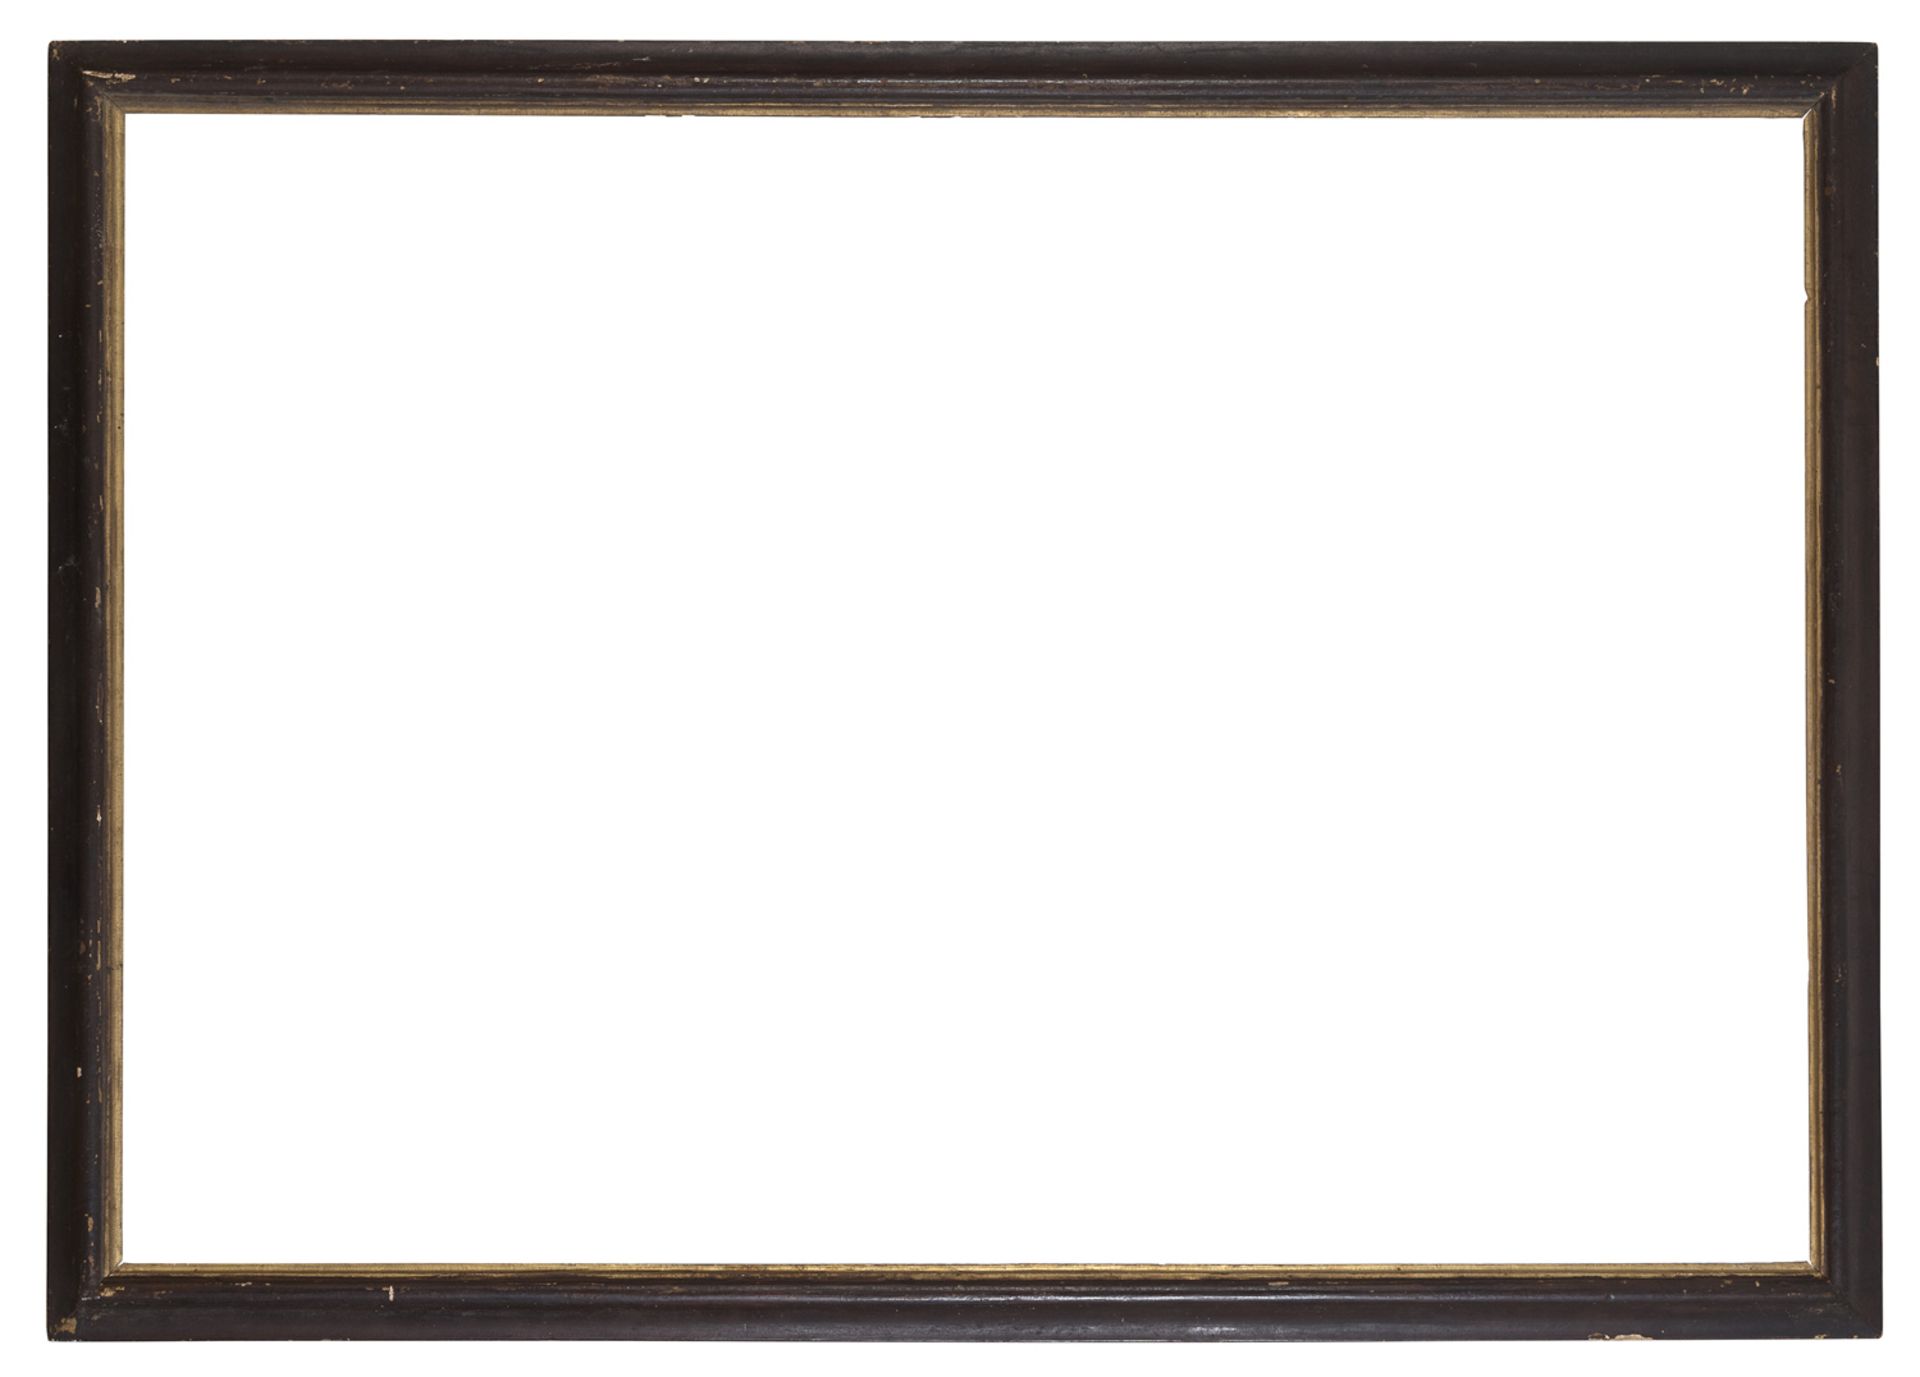 LACQUERED WOOD FRAME LATE18TH CENTURY